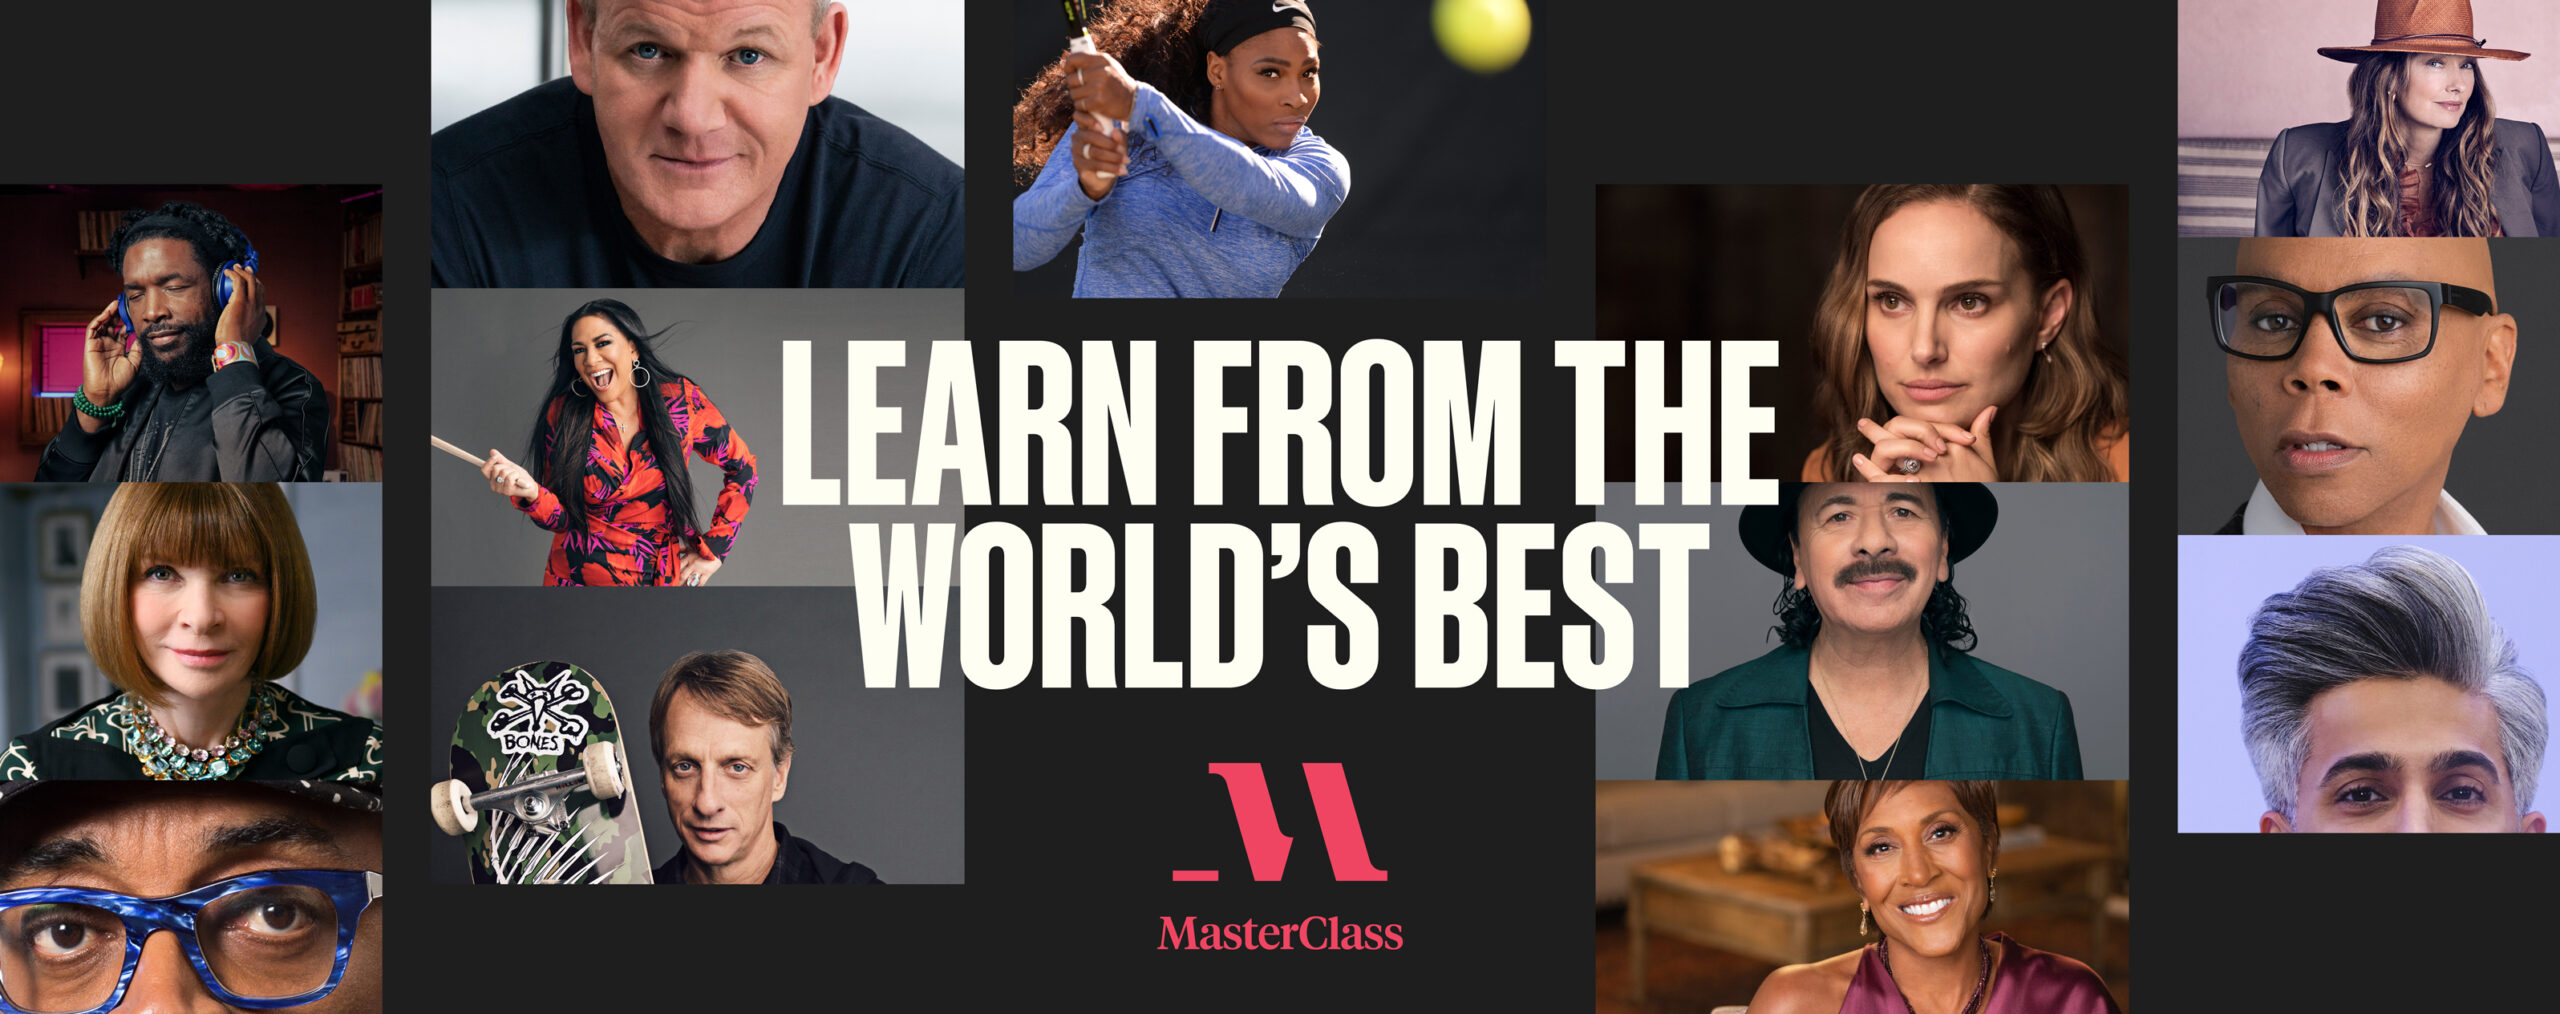 MasterClass Logo, the words "Learn from the world's best", and photos of many of MasterClass' celebrity instructors form a collage.